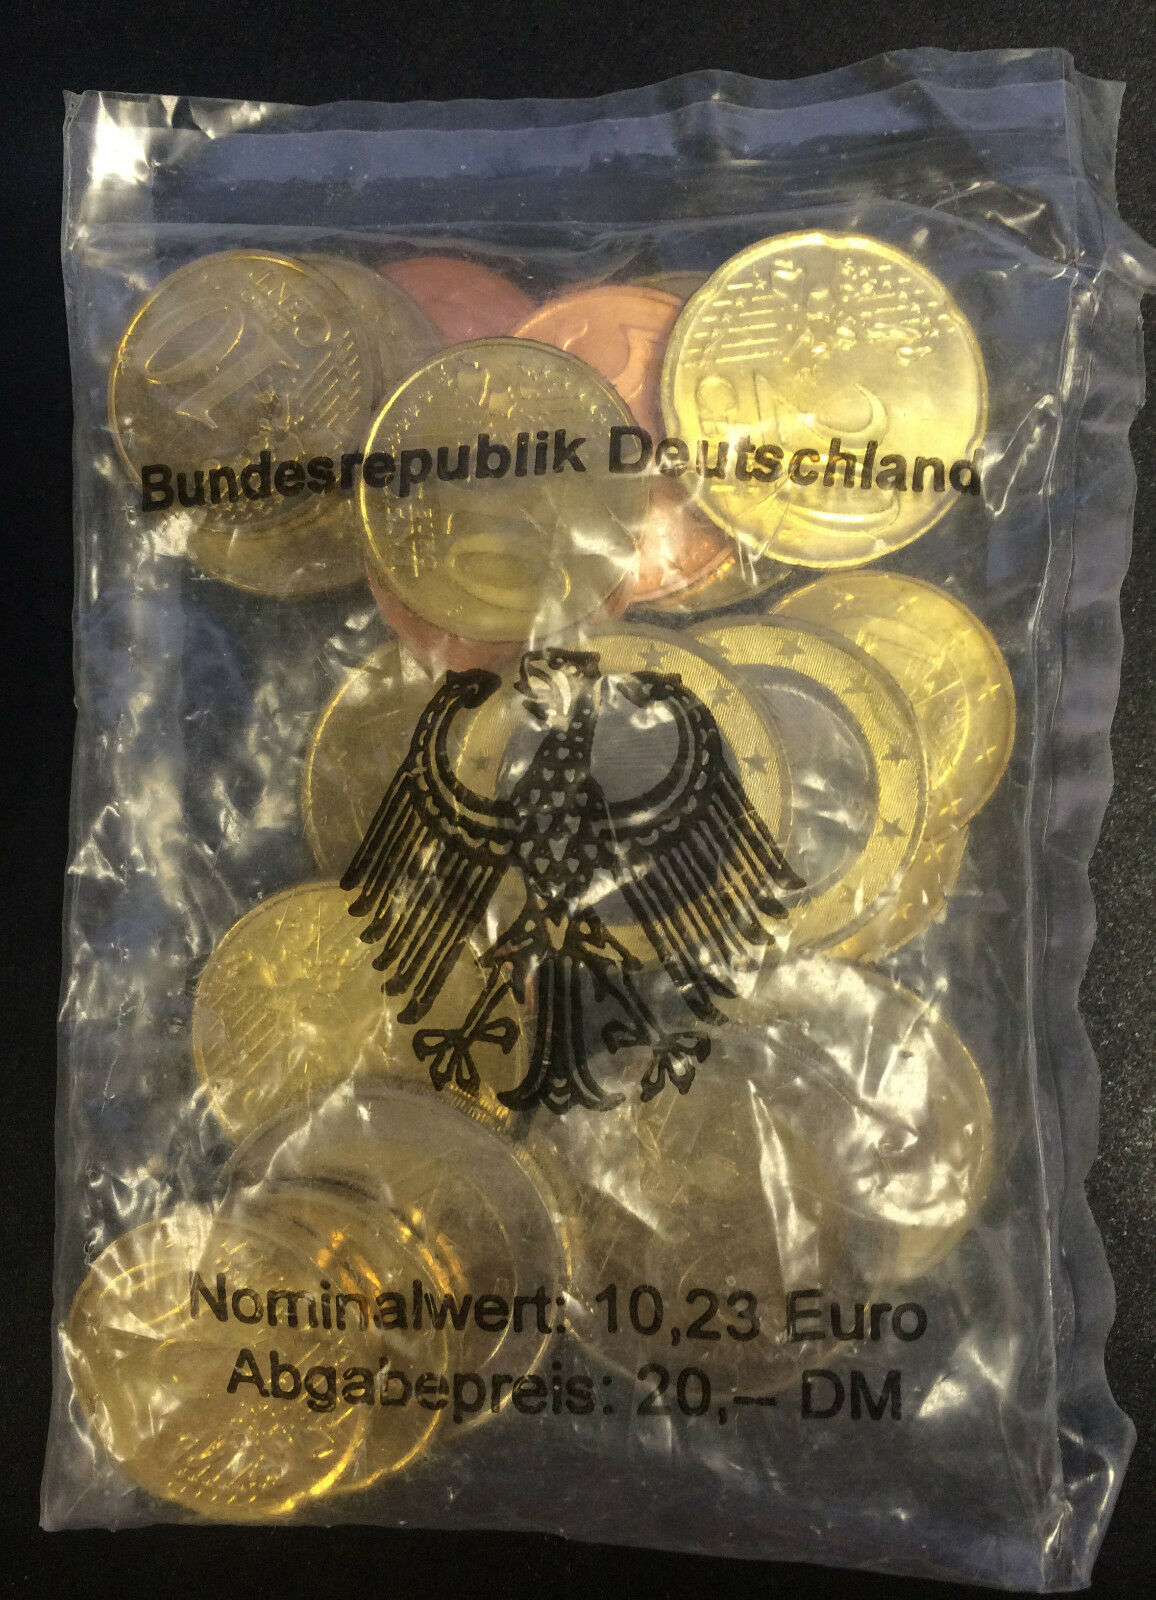 GERMANY ORIGINAL UNOPENED INTRO EURO PACK of 10 | 33 EQUIVALENT to 20 MARKS UNC